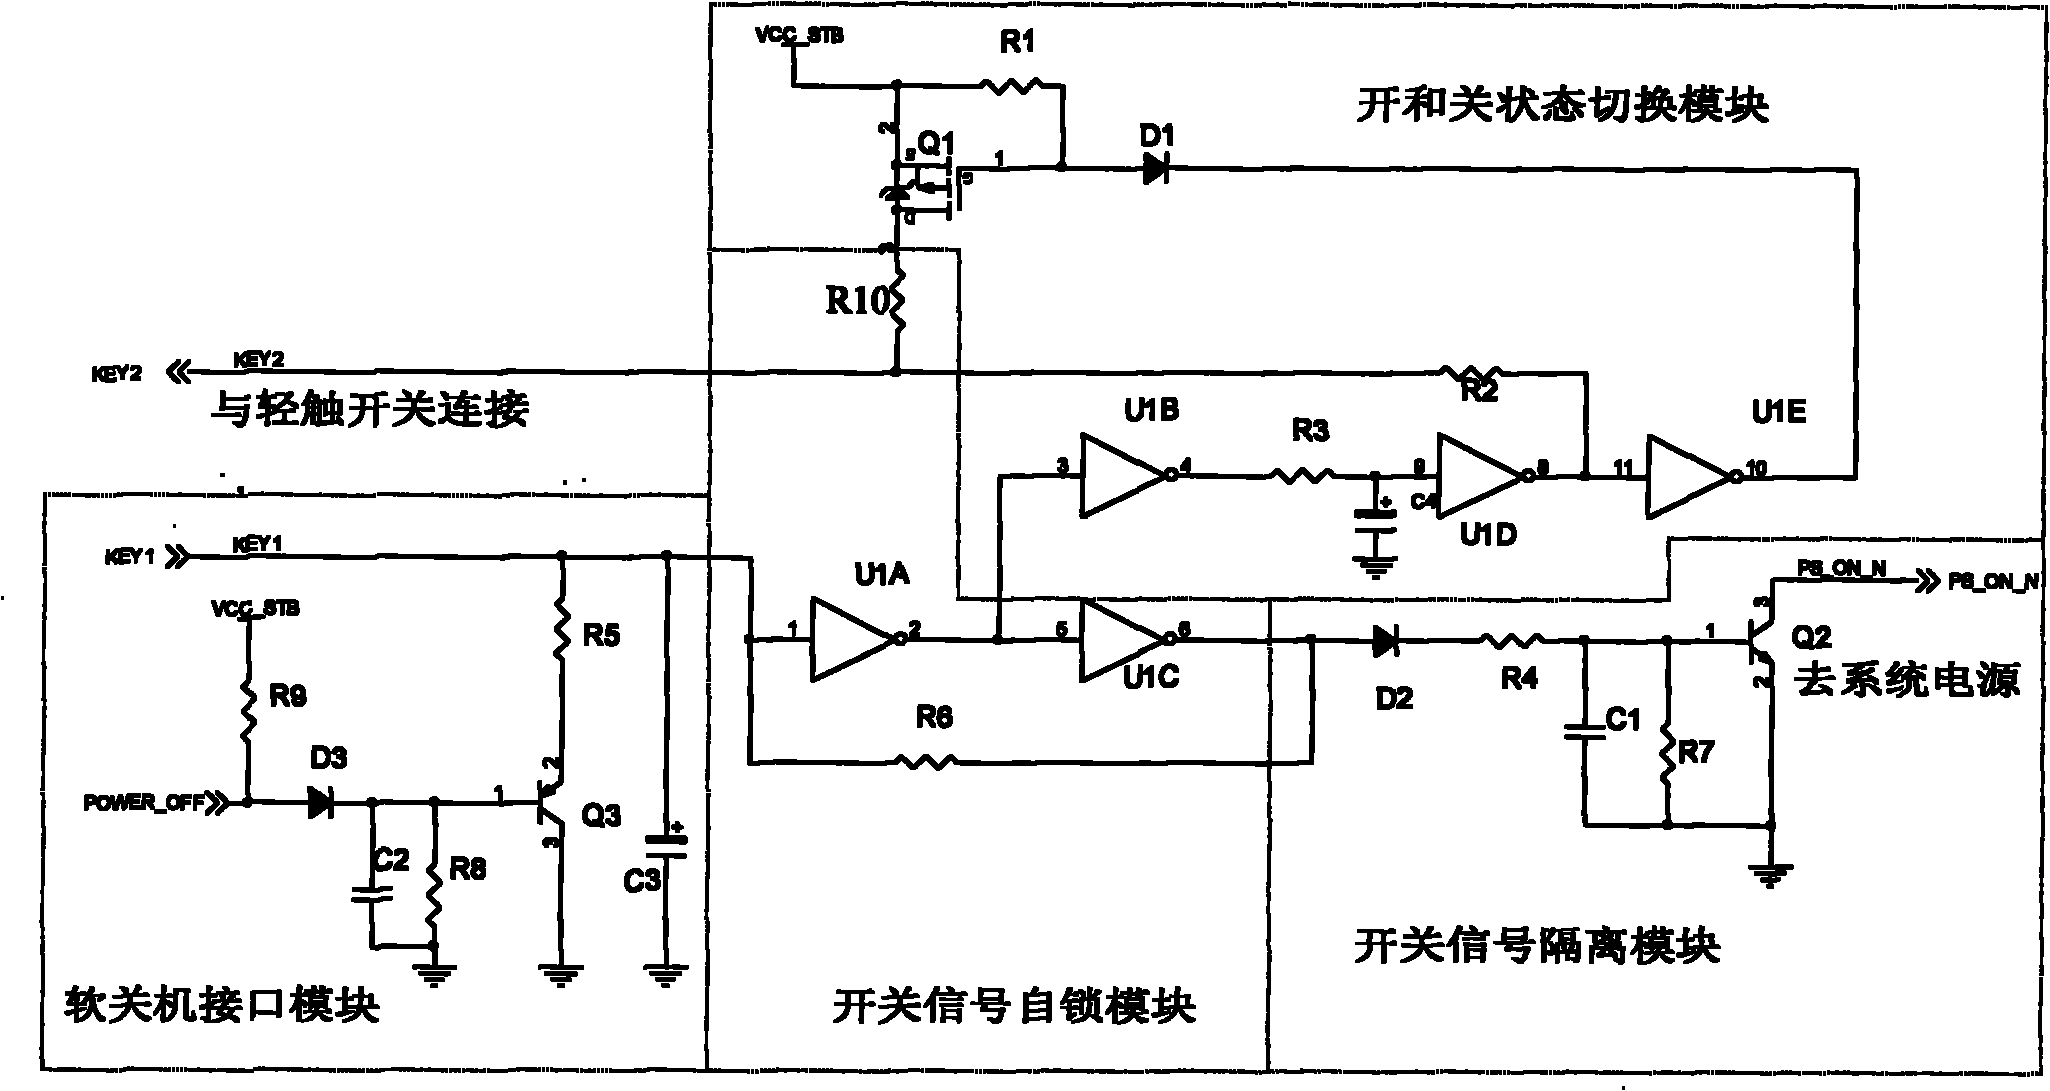 Anti-strong interference switch control signal generating circuit of system power supply